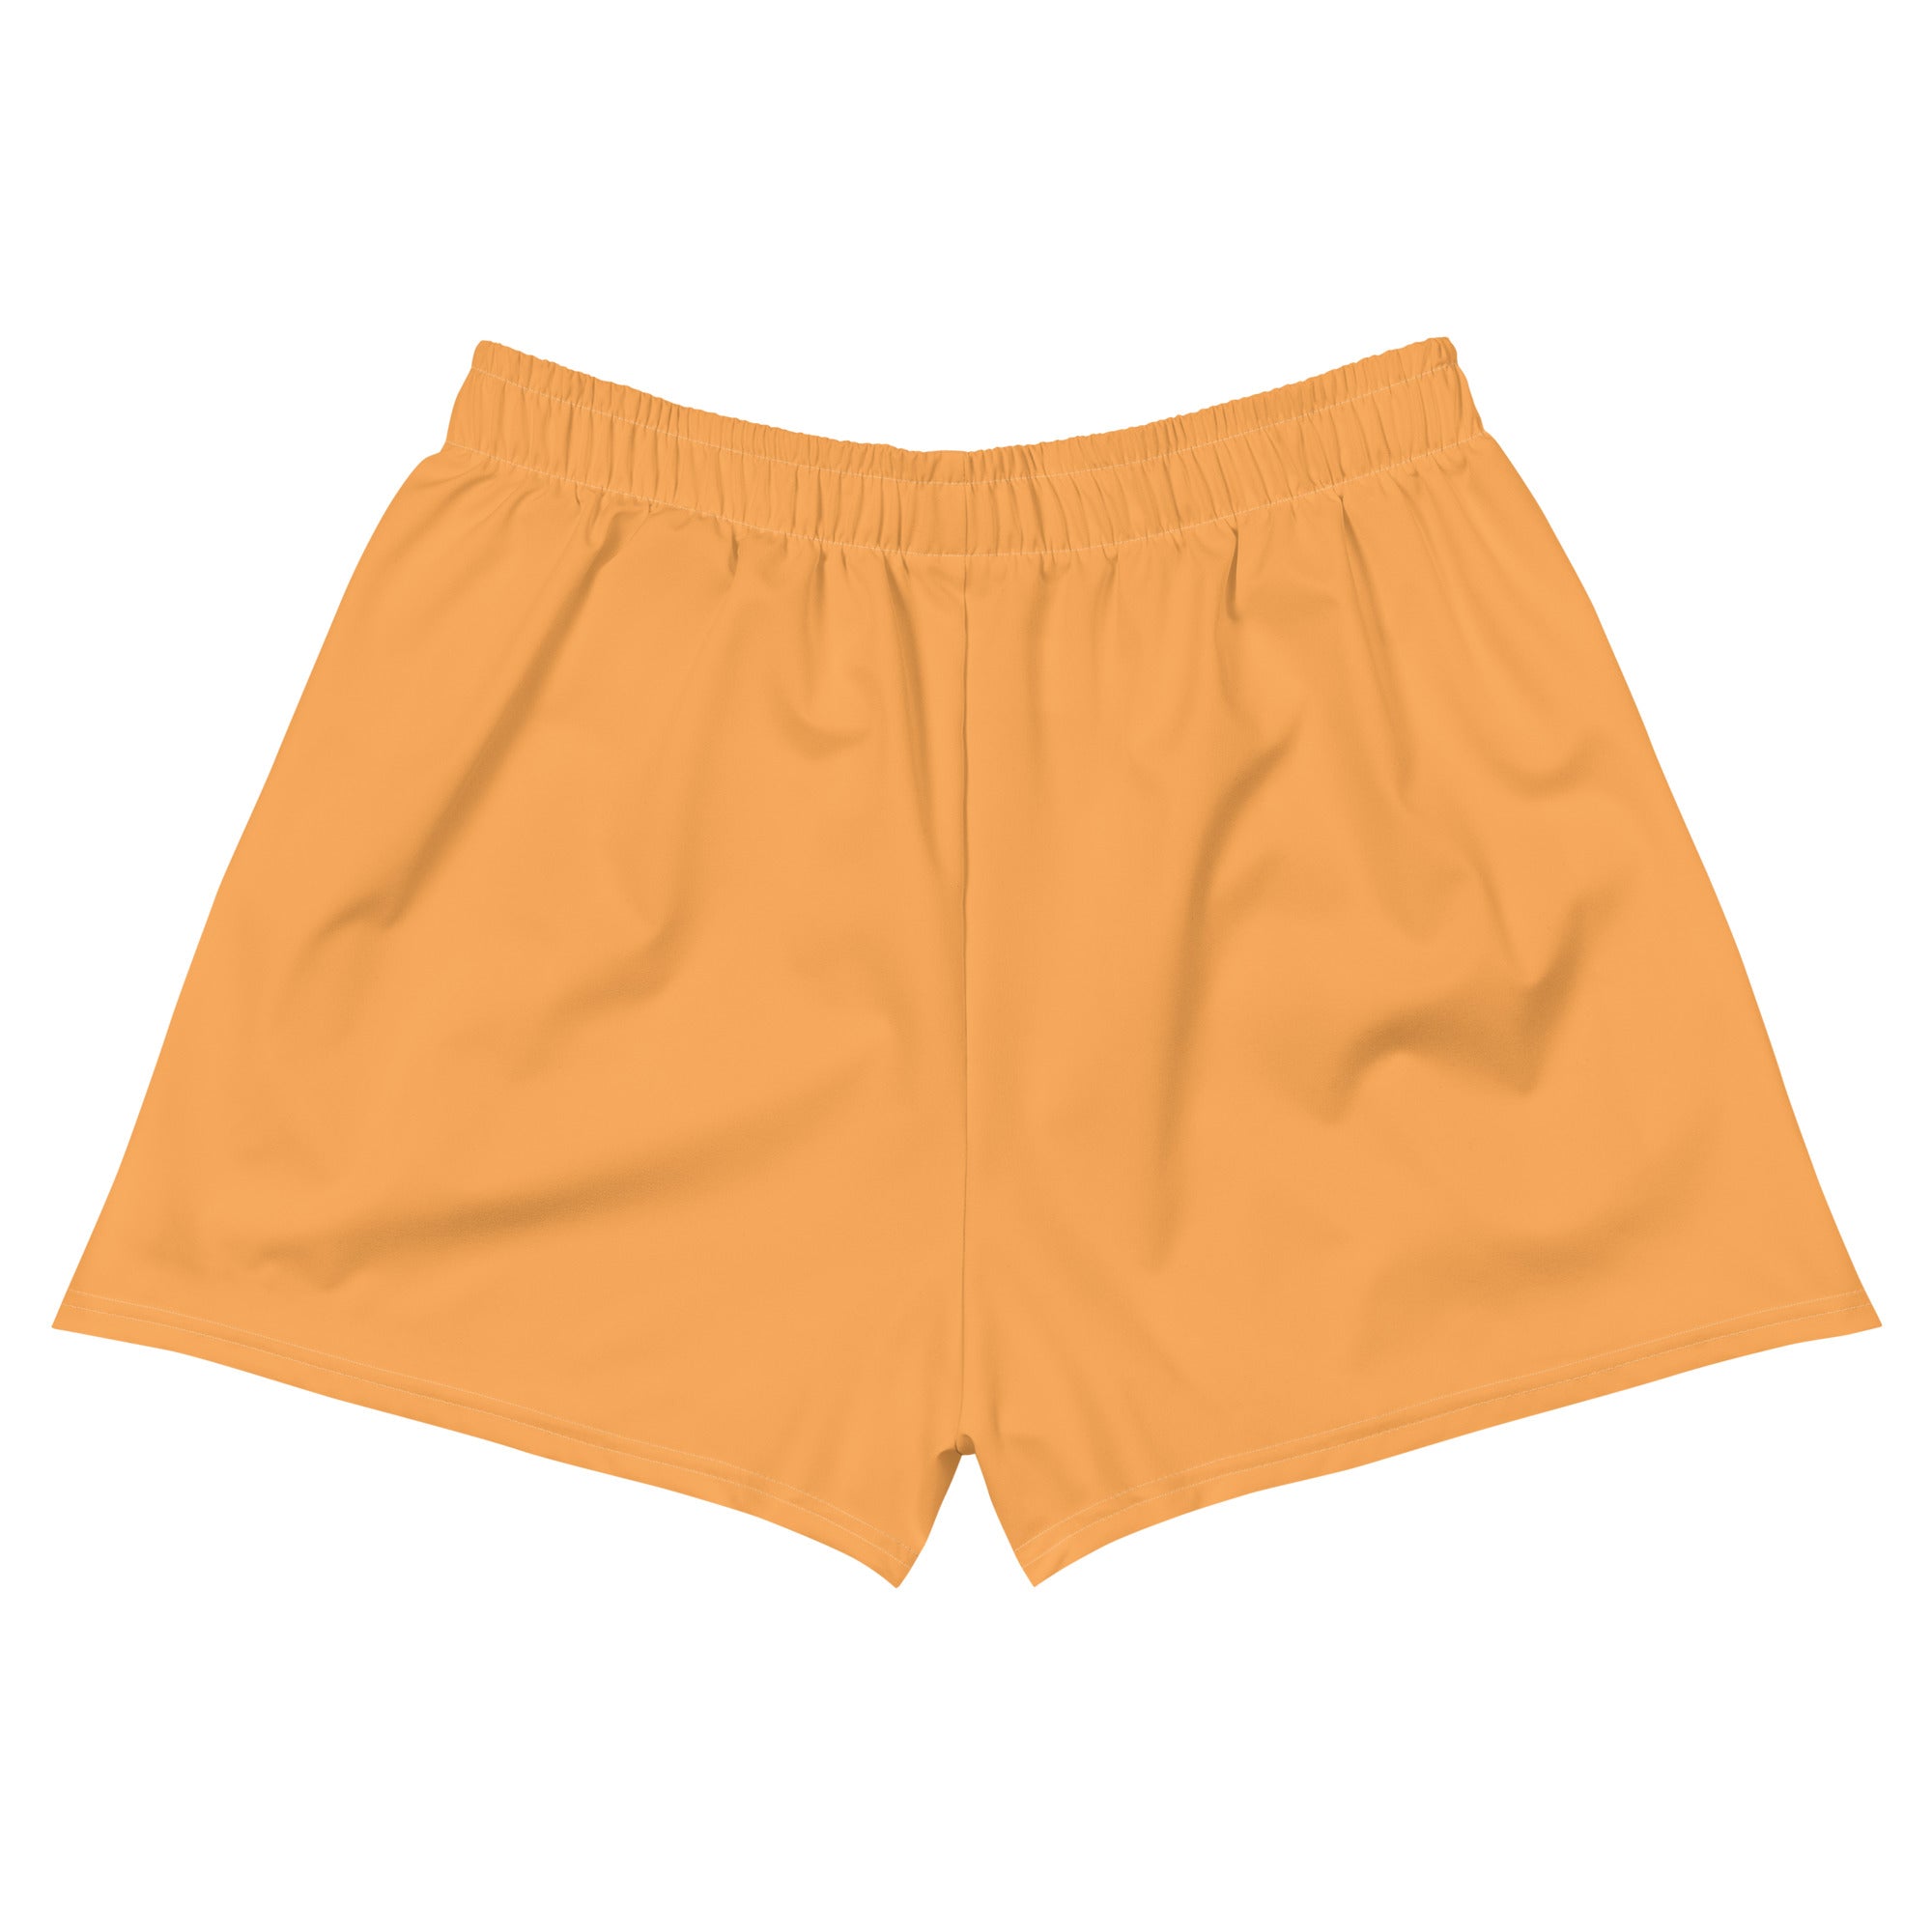 Clementine Women’s Recycled Athletic Shorts